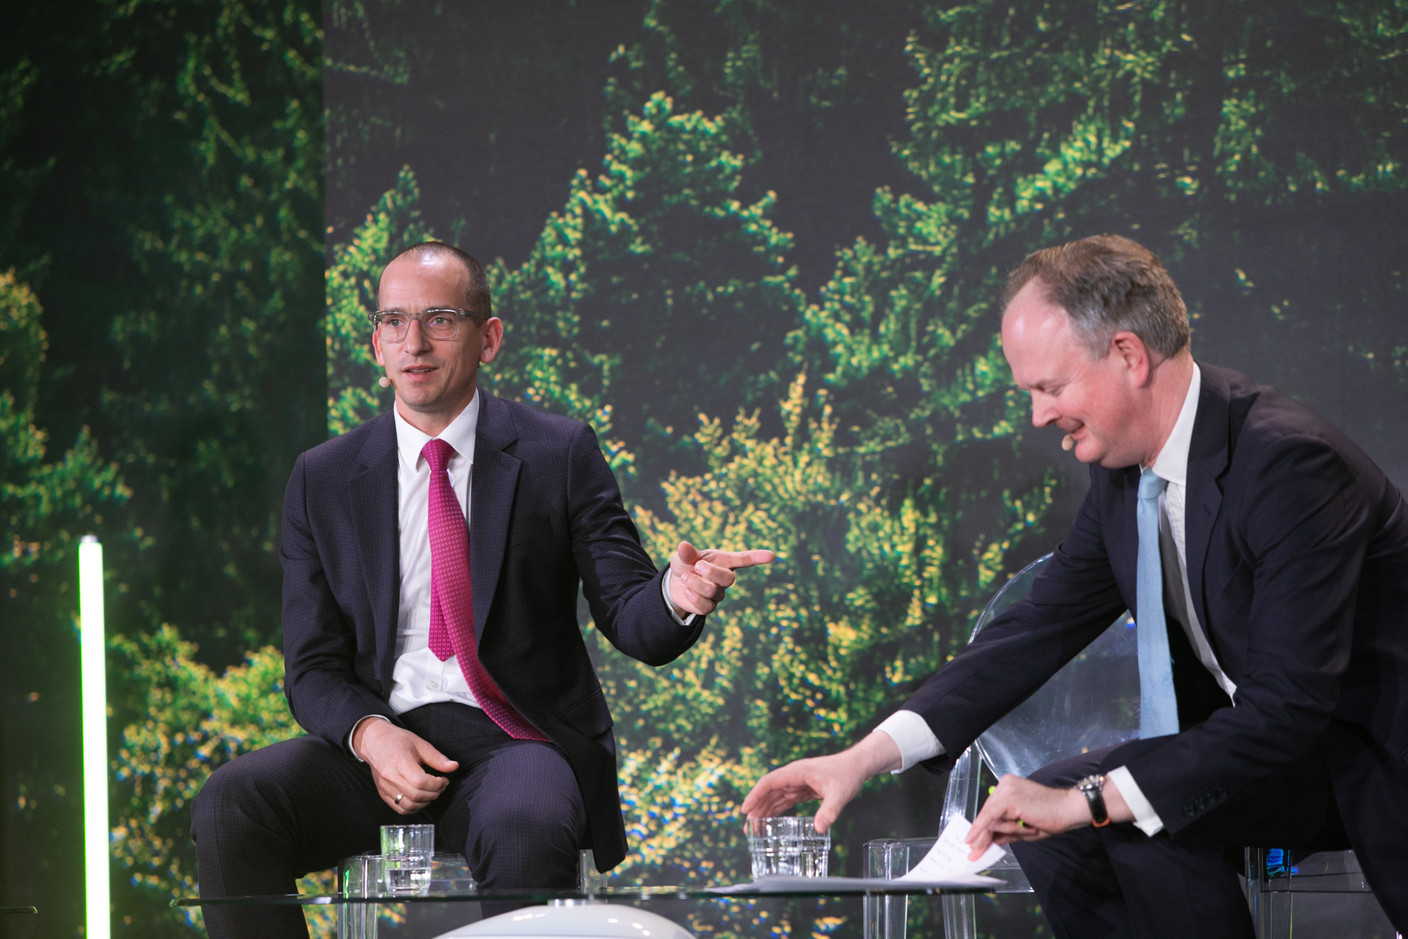 Henrik Pontzen, Union Investment Institutional, and Thomas O’Malley of HSBC Asset Management is seen speaking on the “Implementing ESG principles in practice to develop investment fund products” panel during Alfi’s European Asset Management Conference, 22 March 2023. Photo: Matic Zorman / Maison Moderne